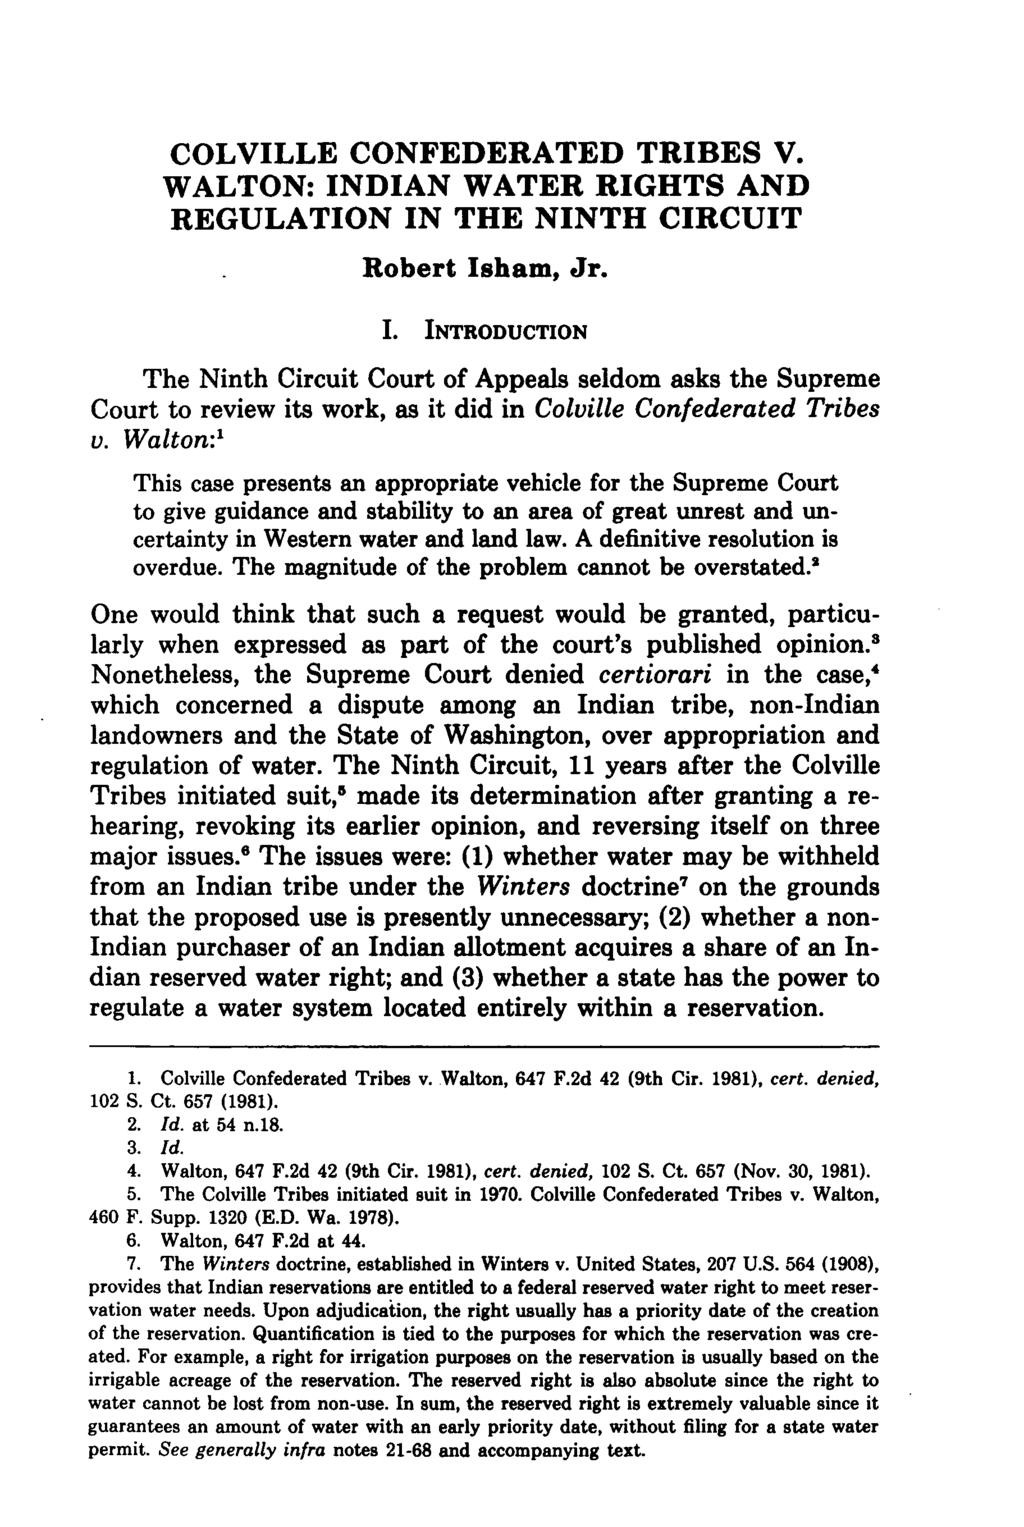 Isham: Indian Water Rights COLVILLE CONFEDERATED TRIBES V. WALTON: INDIAN WATER RIGHTS AND REGULATION IN THE NINTH CIRCUIT Robert Isham, Jr. I. INTRODUCTION The Ninth Circuit Court of Appeals seldom asks the Supreme Court to review its work, as it did in Colville Confederated Tribes v.